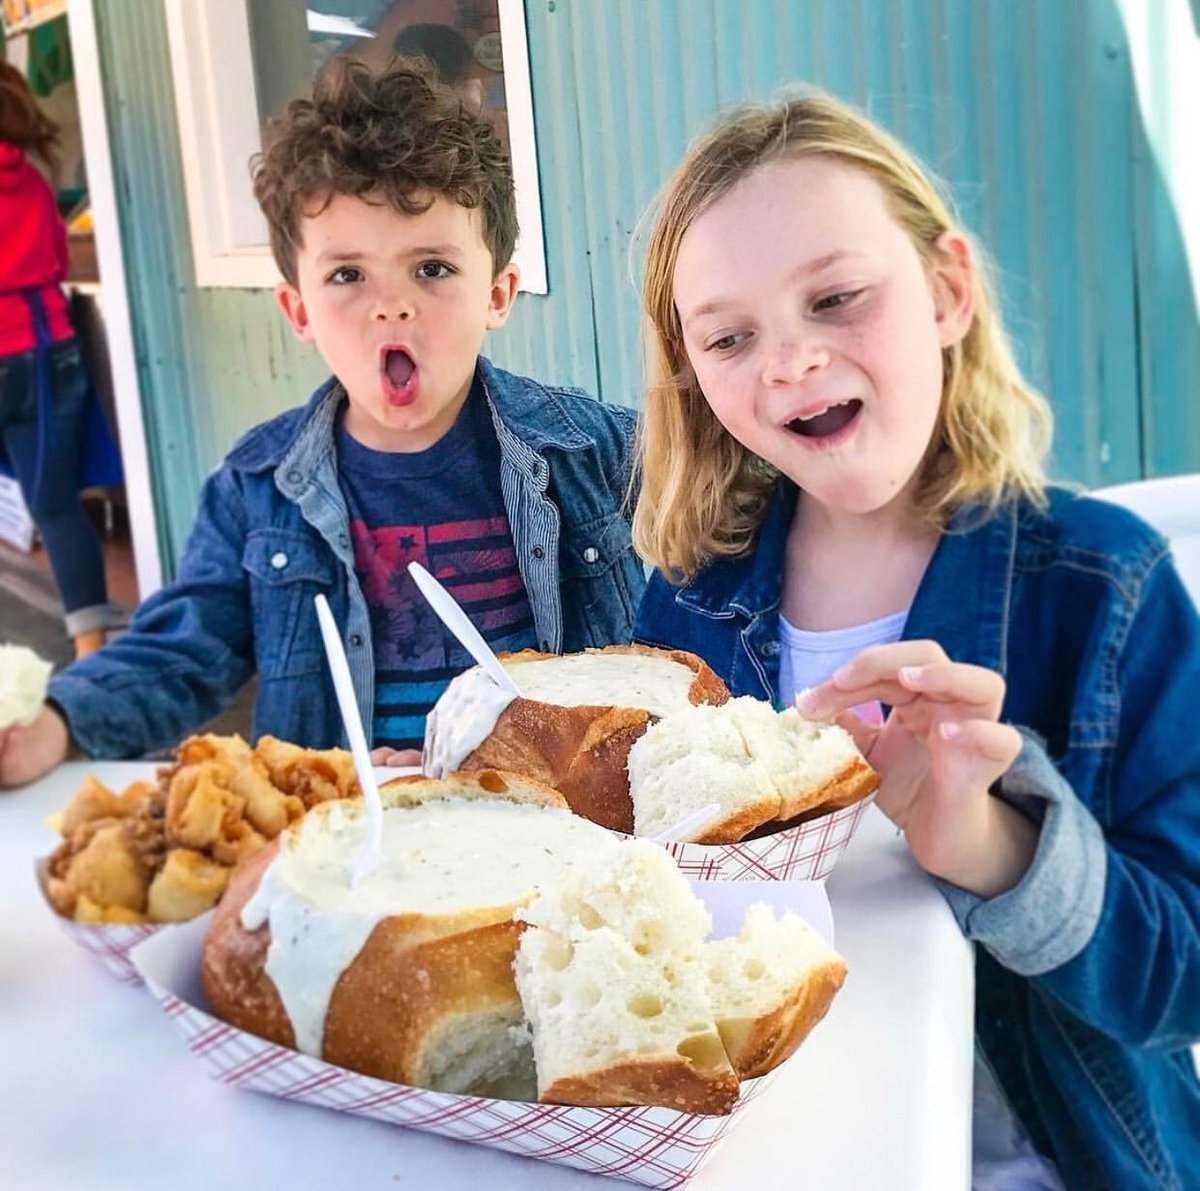 Craving a scrumptious bread bowl of clam chowder in Monterey? 🌊 Discover the ultimate clam chowder spots: bit.ly/2DRd3BW Follow the Clam Chowder trail on the See Monterey App. #BestClamChowder #SeeMonterey 🍲📷 @kejustice @cityofmonterey 
📍 Monterey, CA